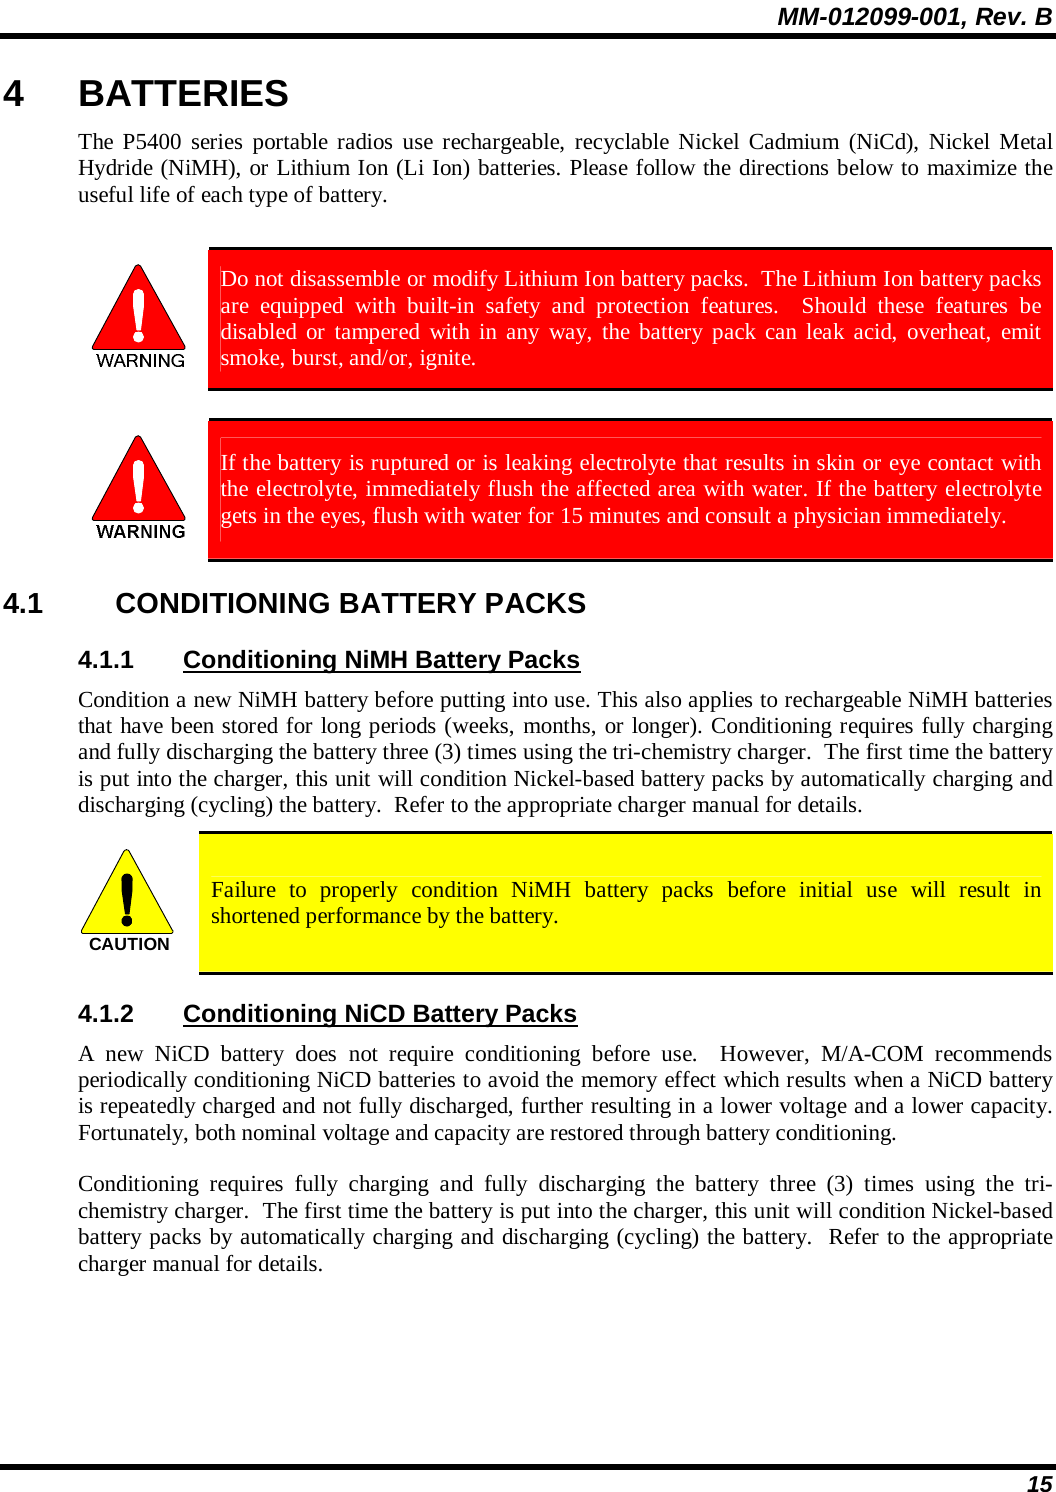 MM-012099-001, Rev. B 15 4 BATTERIES The P5400 series portable radios use rechargeable, recyclable Nickel Cadmium (NiCd), Nickel Metal Hydride (NiMH), or Lithium Ion (Li Ion) batteries. Please follow the directions below to maximize the useful life of each type of battery.   Do not disassemble or modify Lithium Ion battery packs.  The Lithium Ion battery packs are equipped with built-in safety and protection features.  Should these features be disabled or tampered with in any way, the battery pack can leak acid, overheat, emit smoke, burst, and/or, ignite.   If the battery is ruptured or is leaking electrolyte that results in skin or eye contact with the electrolyte, immediately flush the affected area with water. If the battery electrolyte gets in the eyes, flush with water for 15 minutes and consult a physician immediately. 4.1  CONDITIONING BATTERY PACKS 4.1.1  Conditioning NiMH Battery Packs Condition a new NiMH battery before putting into use. This also applies to rechargeable NiMH batteries that have been stored for long periods (weeks, months, or longer). Conditioning requires fully charging and fully discharging the battery three (3) times using the tri-chemistry charger.  The first time the battery is put into the charger, this unit will condition Nickel-based battery packs by automatically charging and discharging (cycling) the battery.  Refer to the appropriate charger manual for details. CAUTION  Failure to properly condition NiMH battery packs before initial use will result in shortened performance by the battery. 4.1.2  Conditioning NiCD Battery Packs A new NiCD battery does not require conditioning before use.  However, M/A-COM recommends periodically conditioning NiCD batteries to avoid the memory effect which results when a NiCD battery is repeatedly charged and not fully discharged, further resulting in a lower voltage and a lower capacity. Fortunately, both nominal voltage and capacity are restored through battery conditioning.   Conditioning requires fully charging and fully discharging the battery three (3) times using the tri-chemistry charger.  The first time the battery is put into the charger, this unit will condition Nickel-based battery packs by automatically charging and discharging (cycling) the battery.  Refer to the appropriate charger manual for details.  